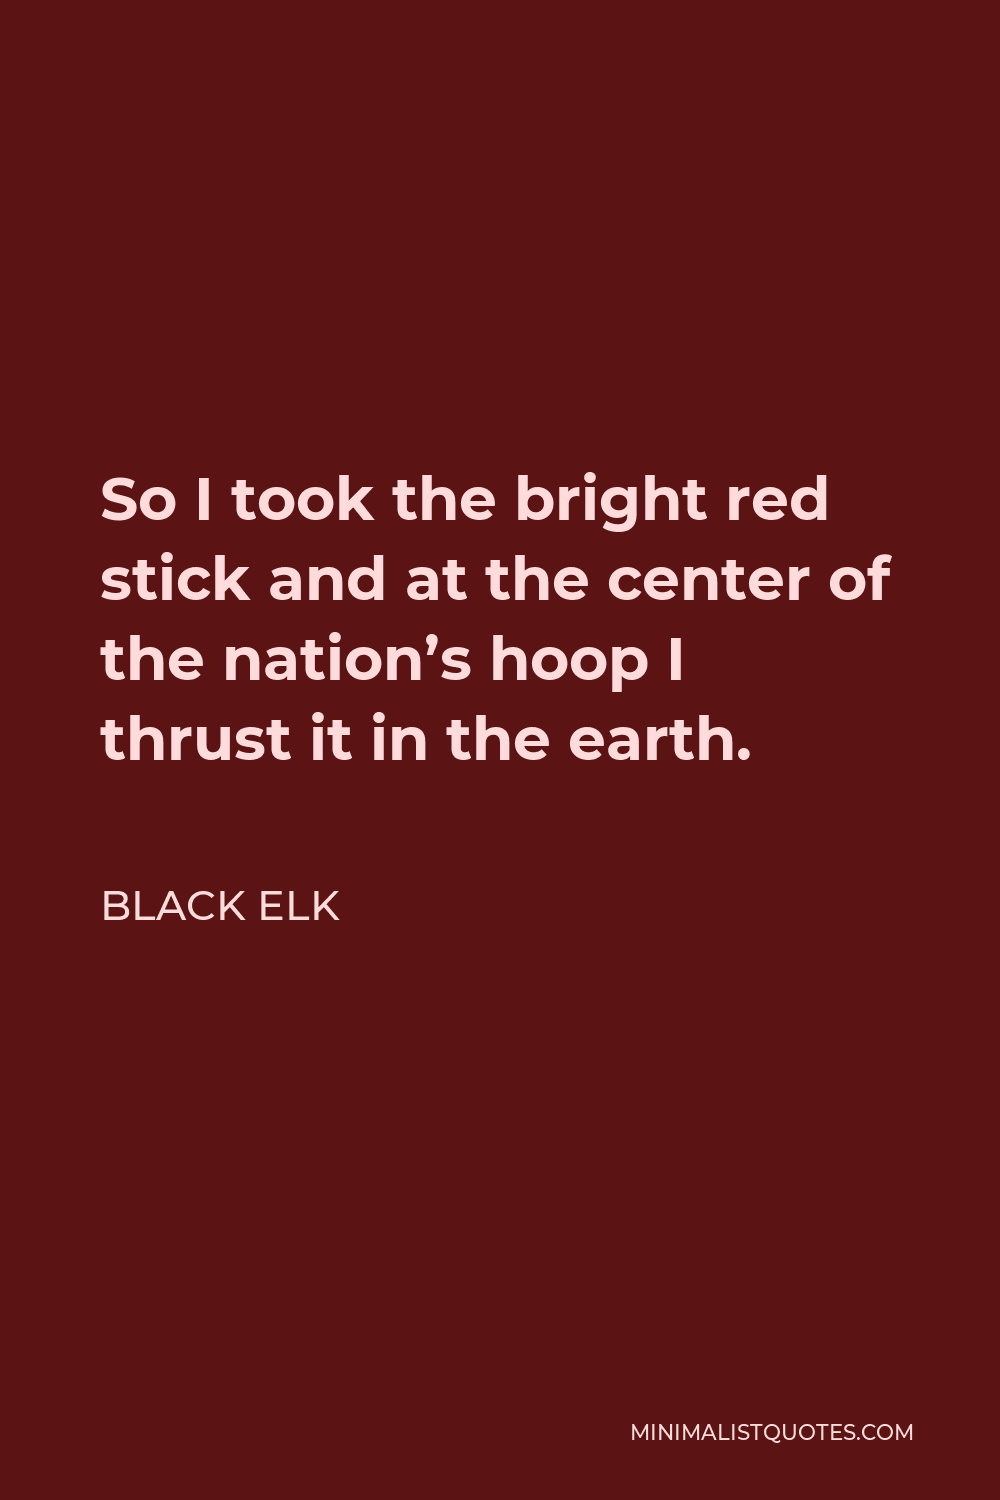 Black Elk Quote - So I took the bright red stick and at the center of the nation’s hoop I thrust it in the earth.